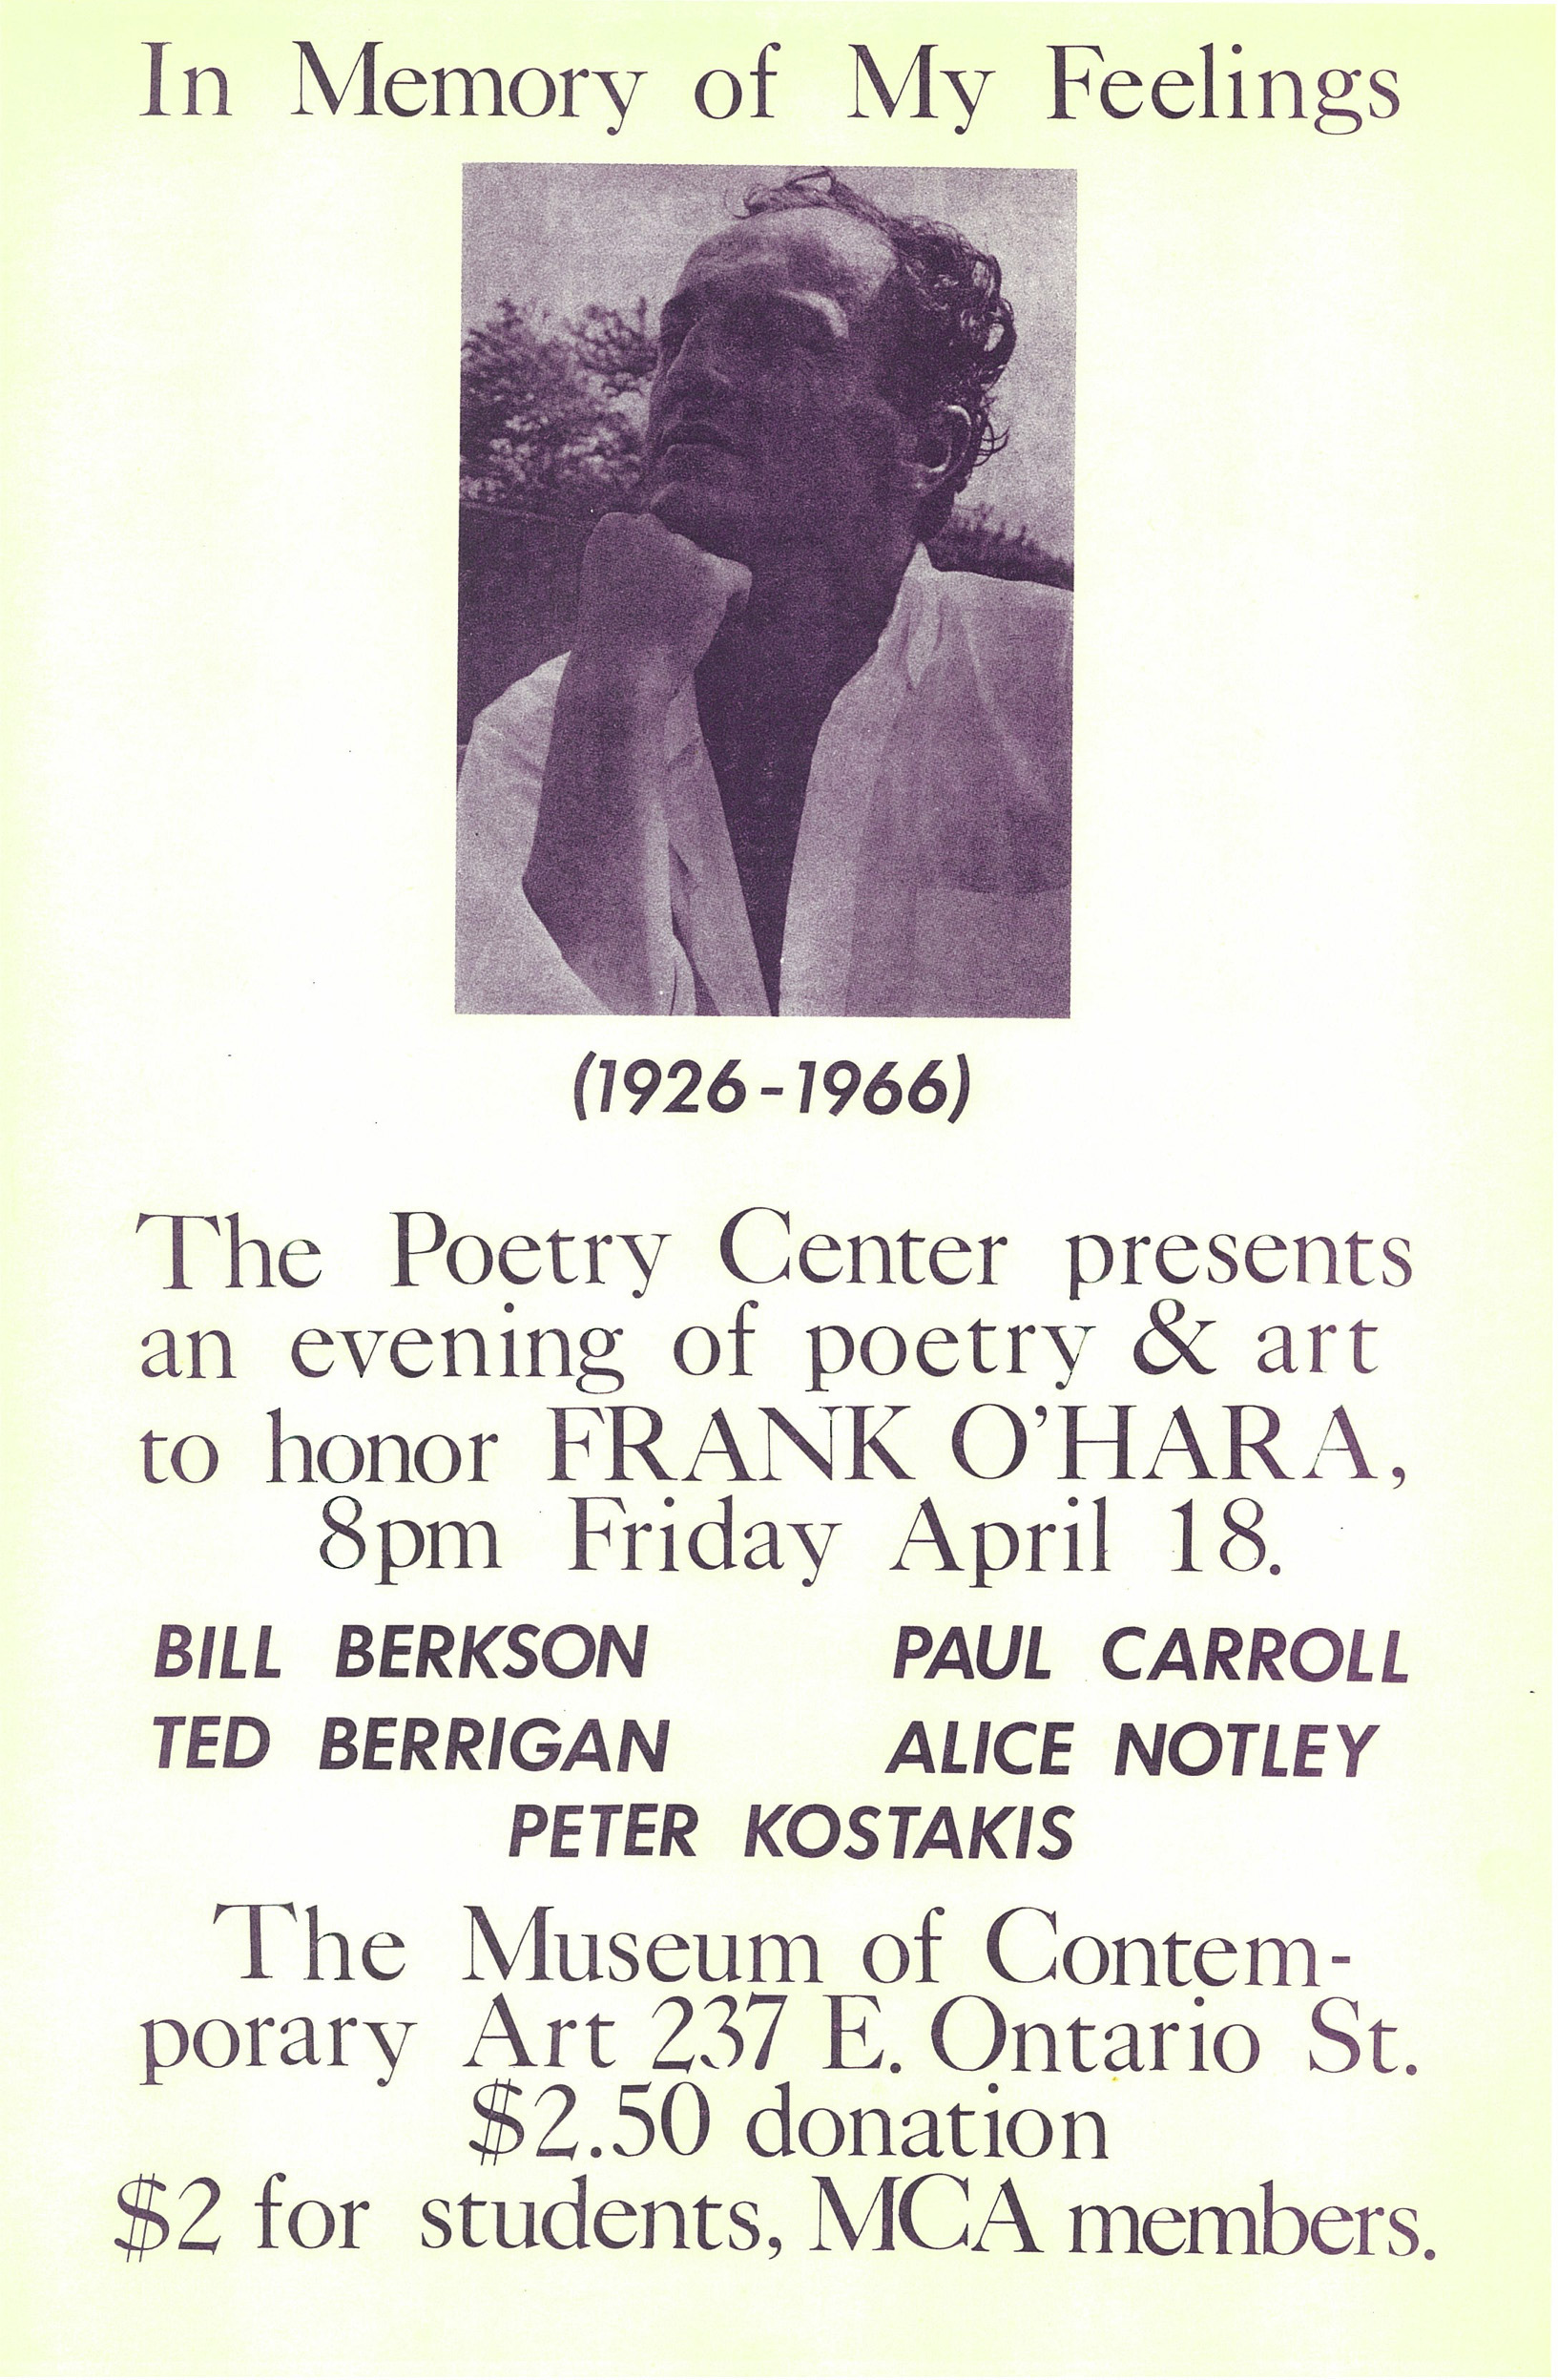 Vintage poster of Bill Berkson, Ted Berrigan, Paul Carroll, Alice Notley, and Peter Kostakis givnig a poetry reading in honor of Frank O'Hara at the Poetry Center of Chicago.